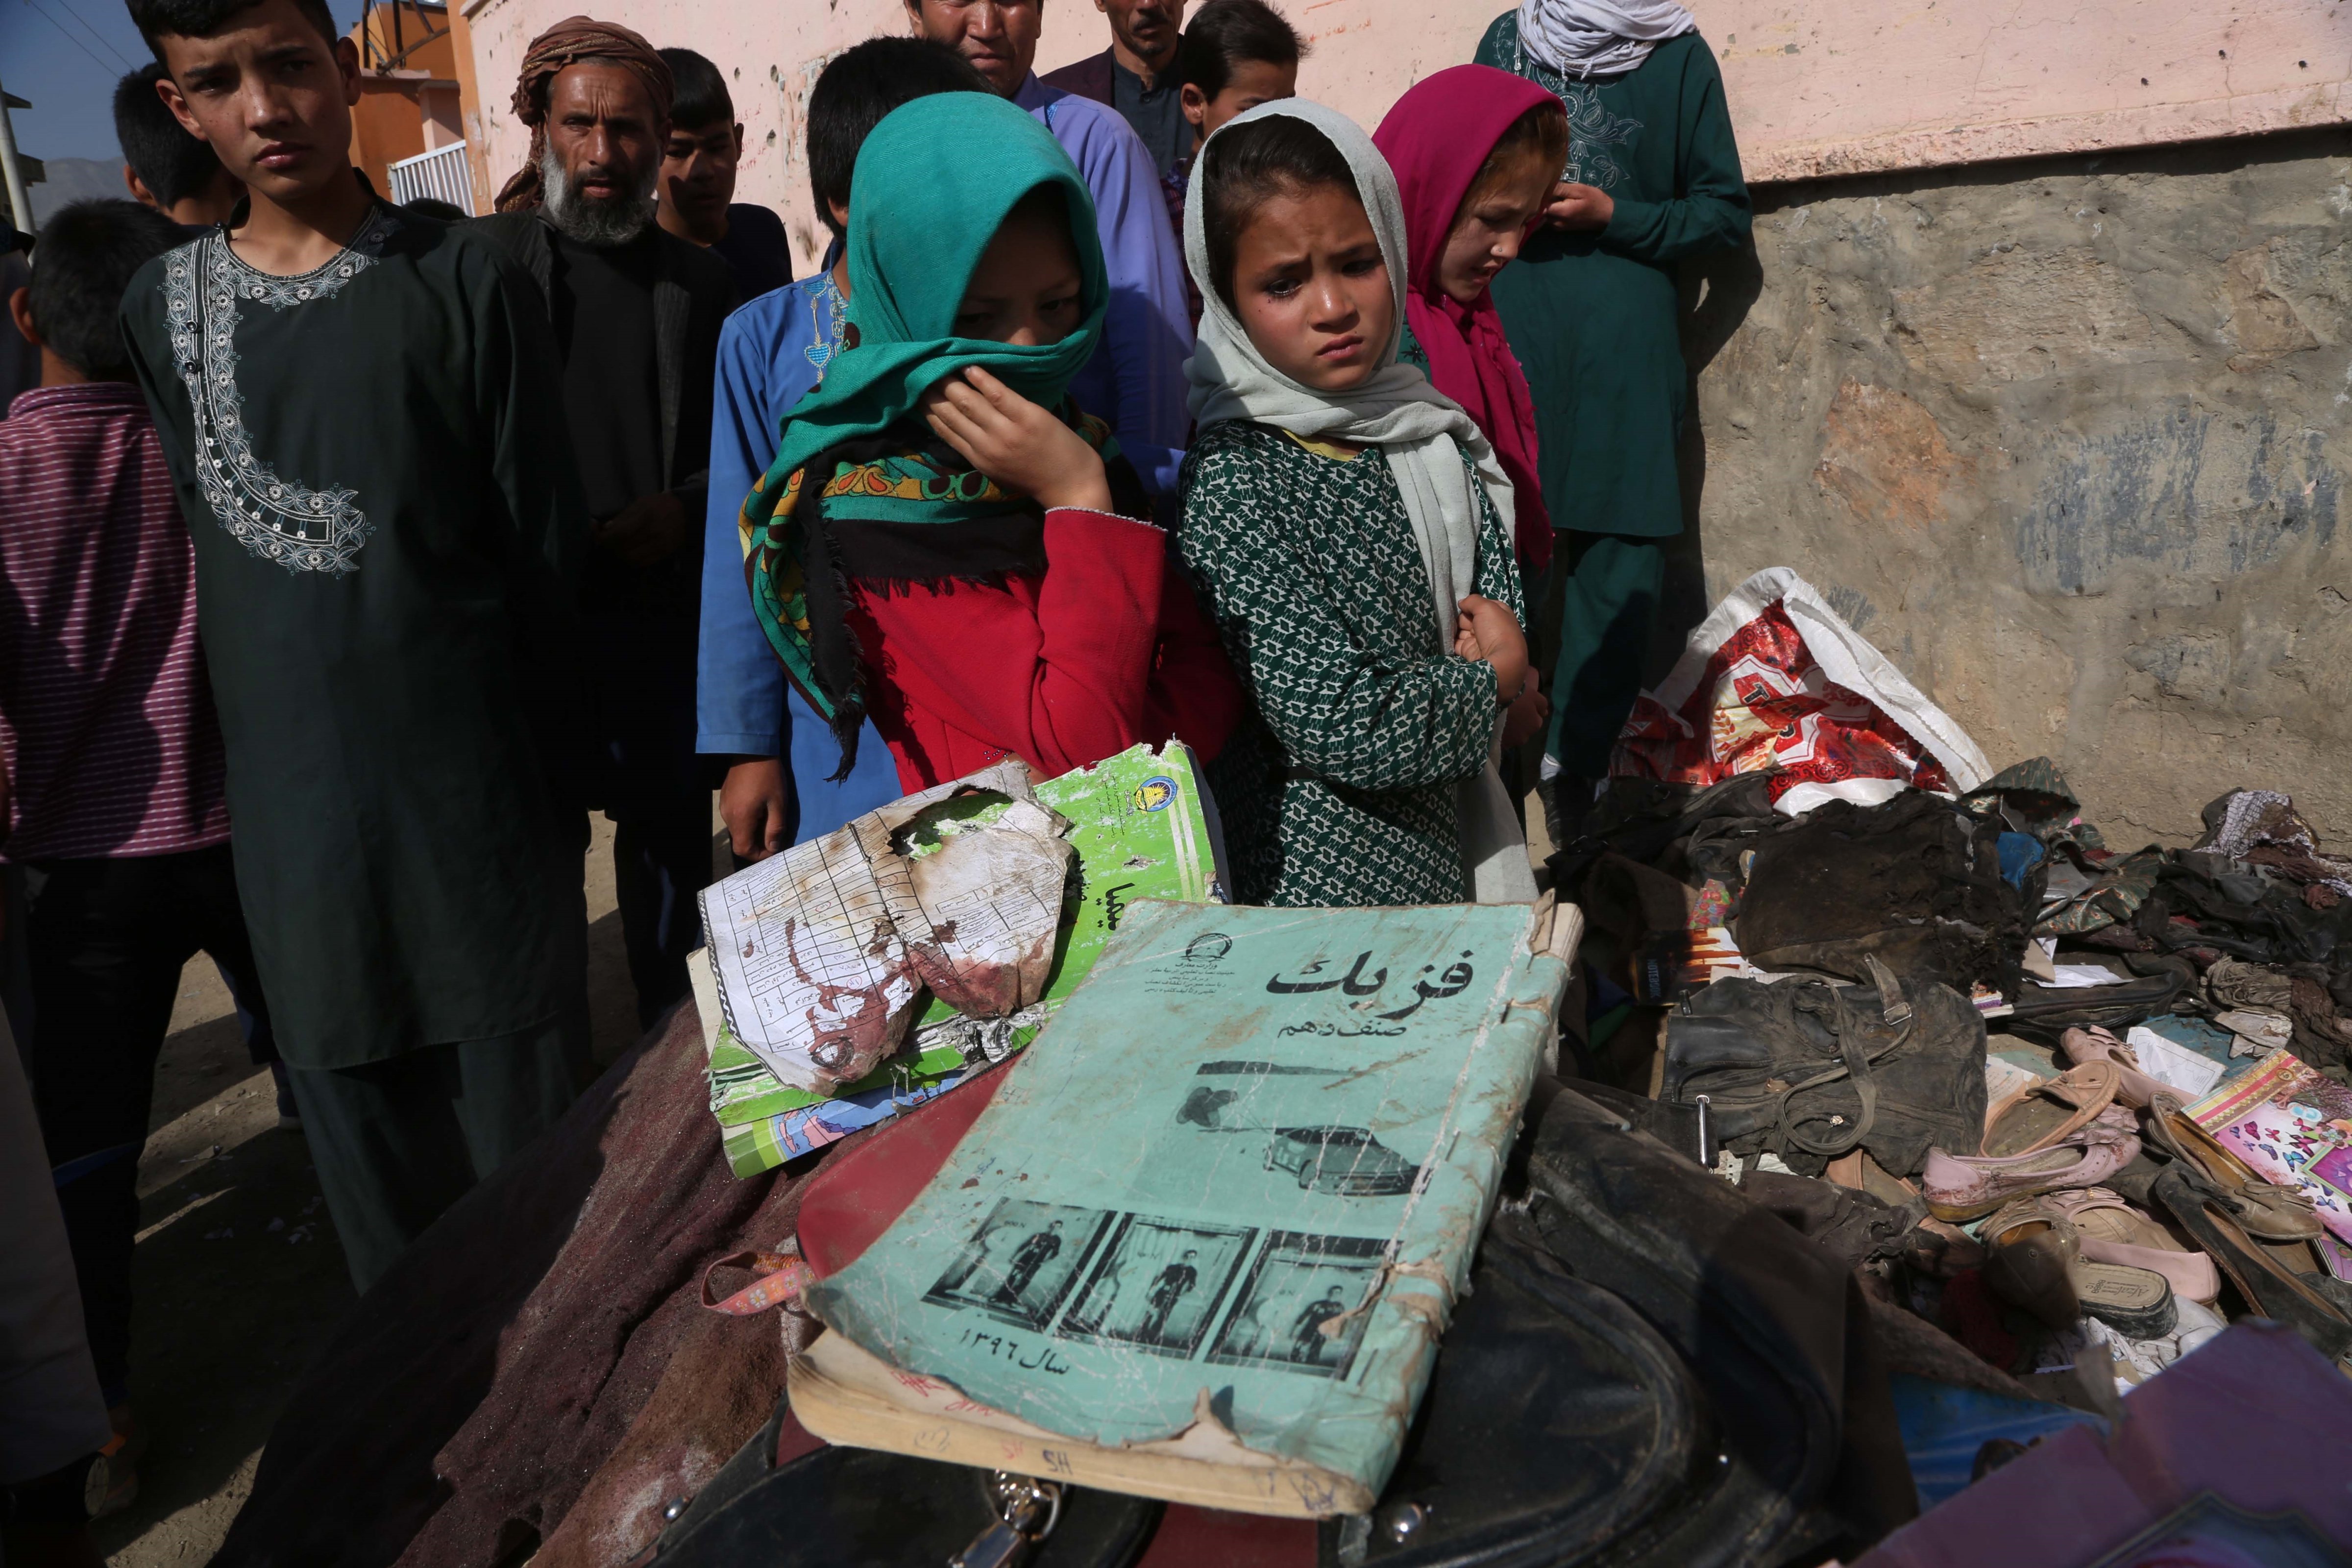 Books of students who were killed in a terror attack in Kabul on May 8, 2021. Most of the victims were school girls while many passers-by were also affected. Getty Images/Xinhua News Agency. (Getty Images/Xinhua News Agency.)